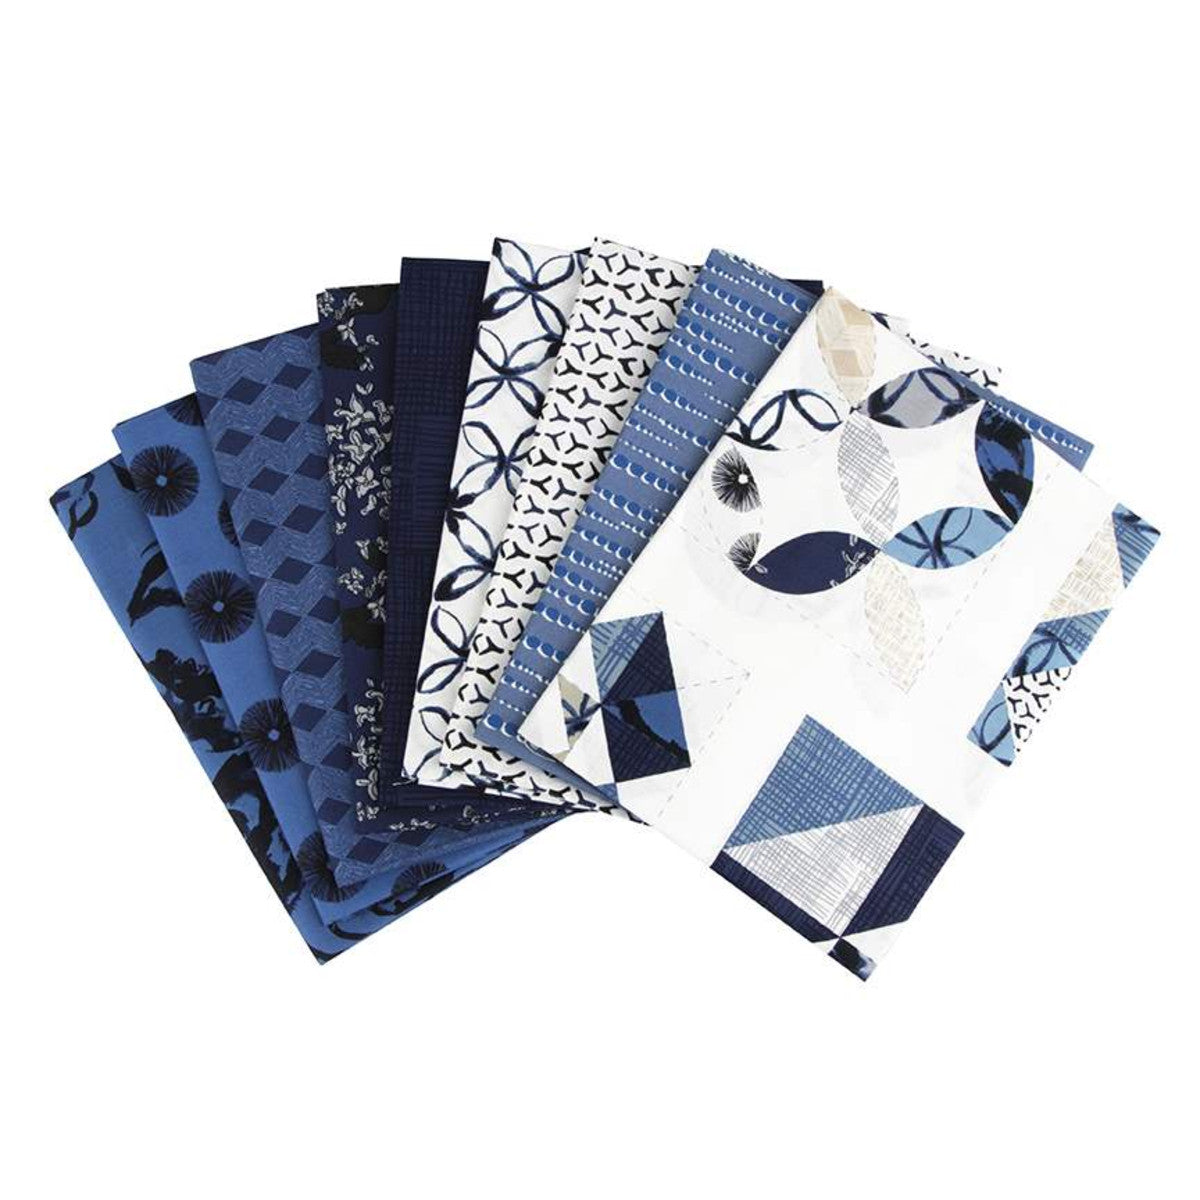 This 1-Yard precut bundle includes a 1-yard piece of each print in the blue colorway (C11320-BLUE, C11321-WHITE, C11322-NAVY, C11323-NAVY, C11324-NAVY, C11325-BLUE, C11326-WHITE, C11327-COASTAL, CH11328-CALM) from the Water Mark collection by Tammie Green for Riley Blake Designs for a total of 9 yards.  100% cotton  Width: 43"/44"